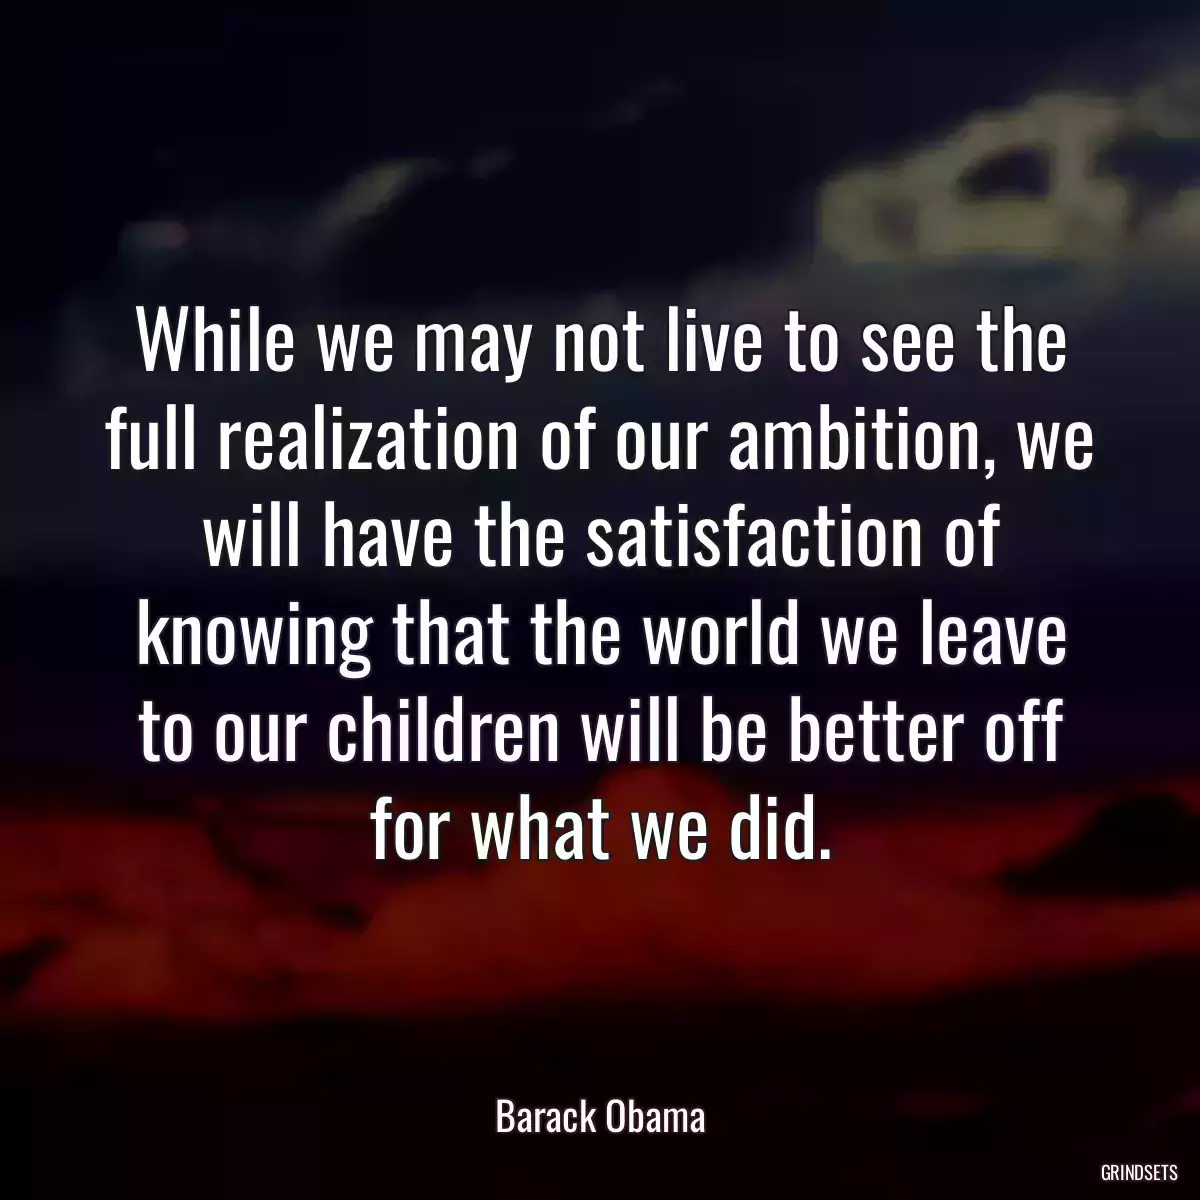 While we may not live to see the full realization of our ambition, we will have the satisfaction of knowing that the world we leave to our children will be better off for what we did.